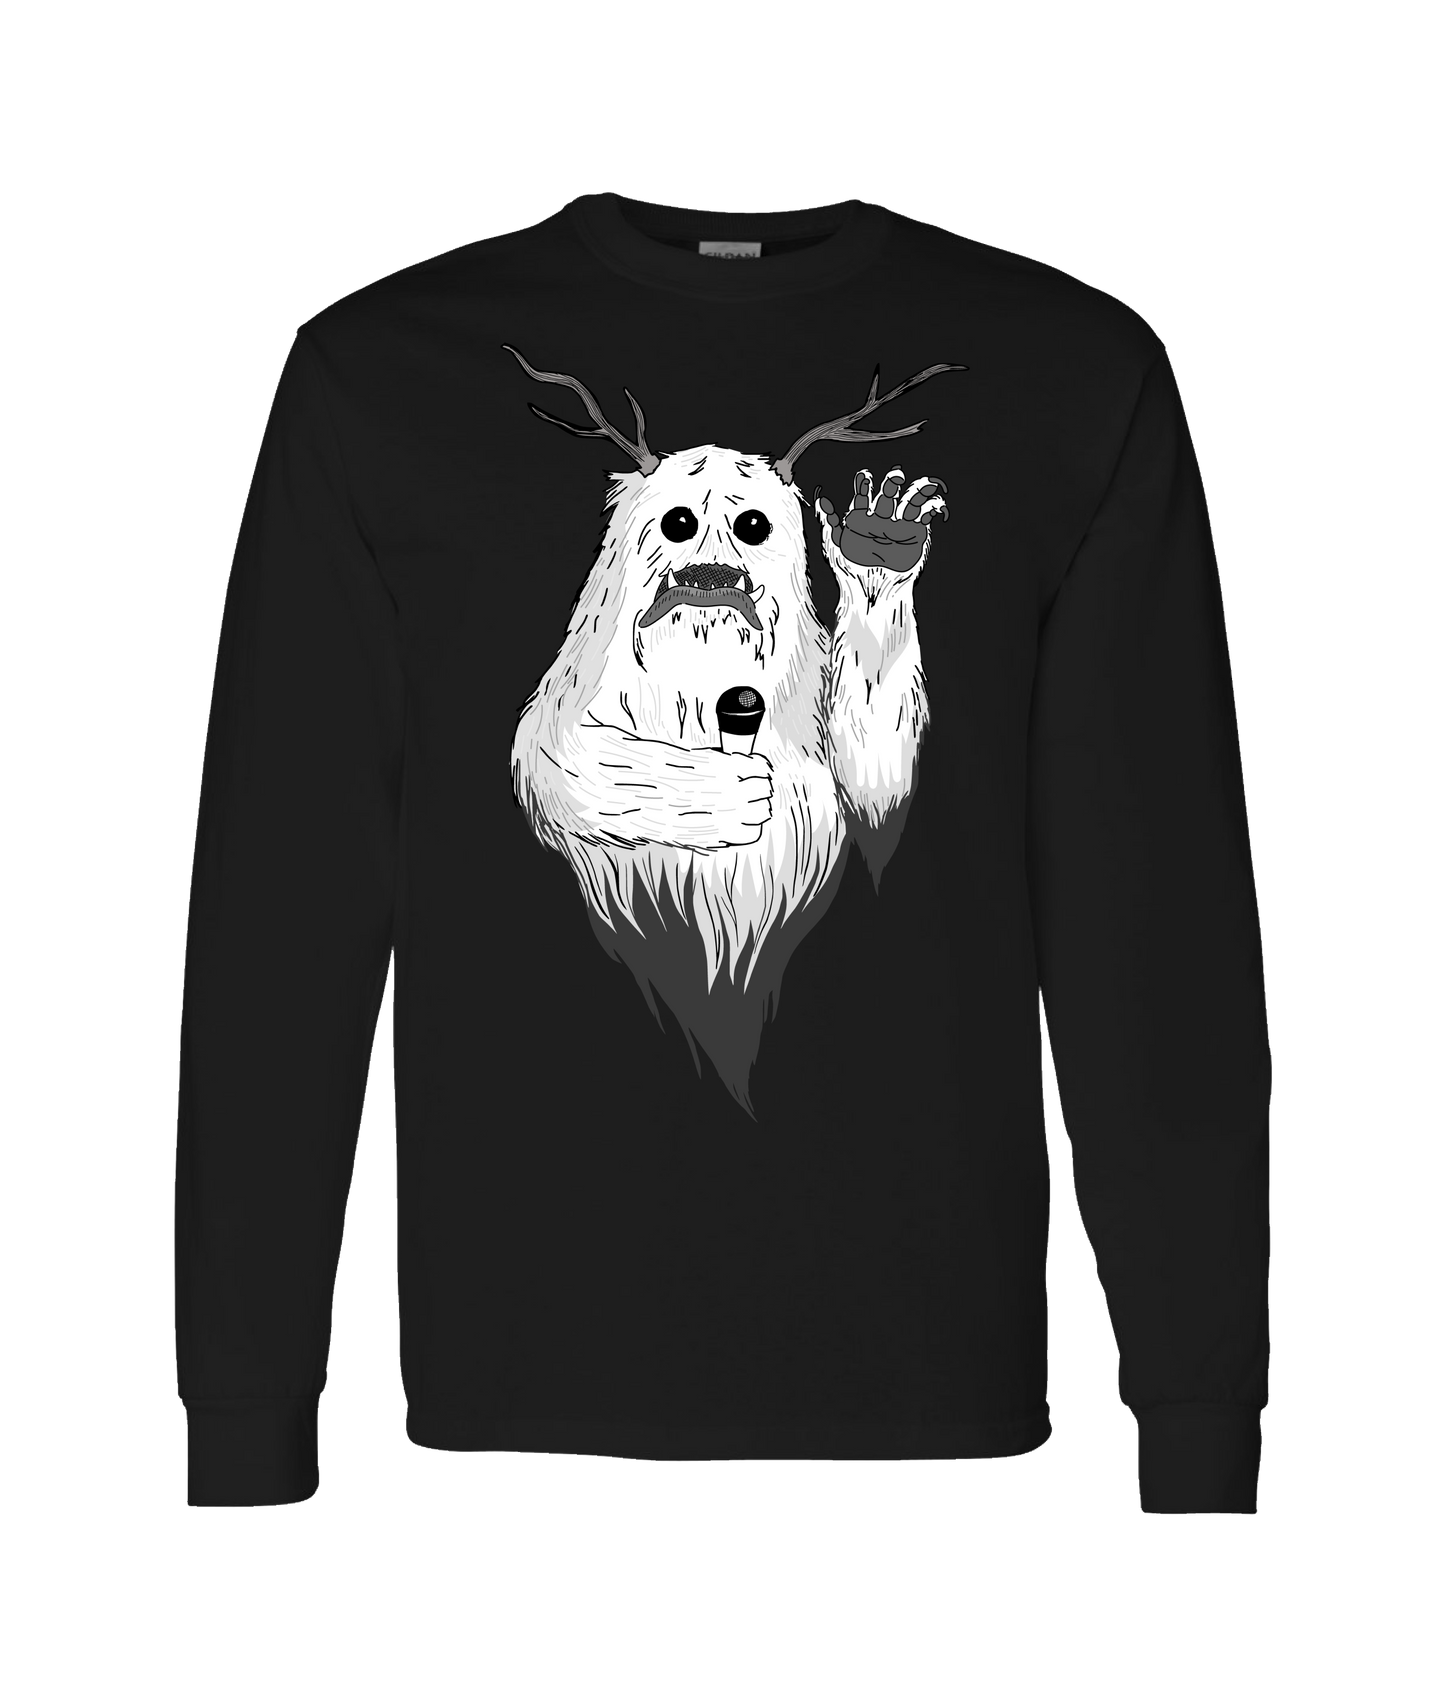 Sparks Across Darkness - Sparky - Black Long Sleeve T